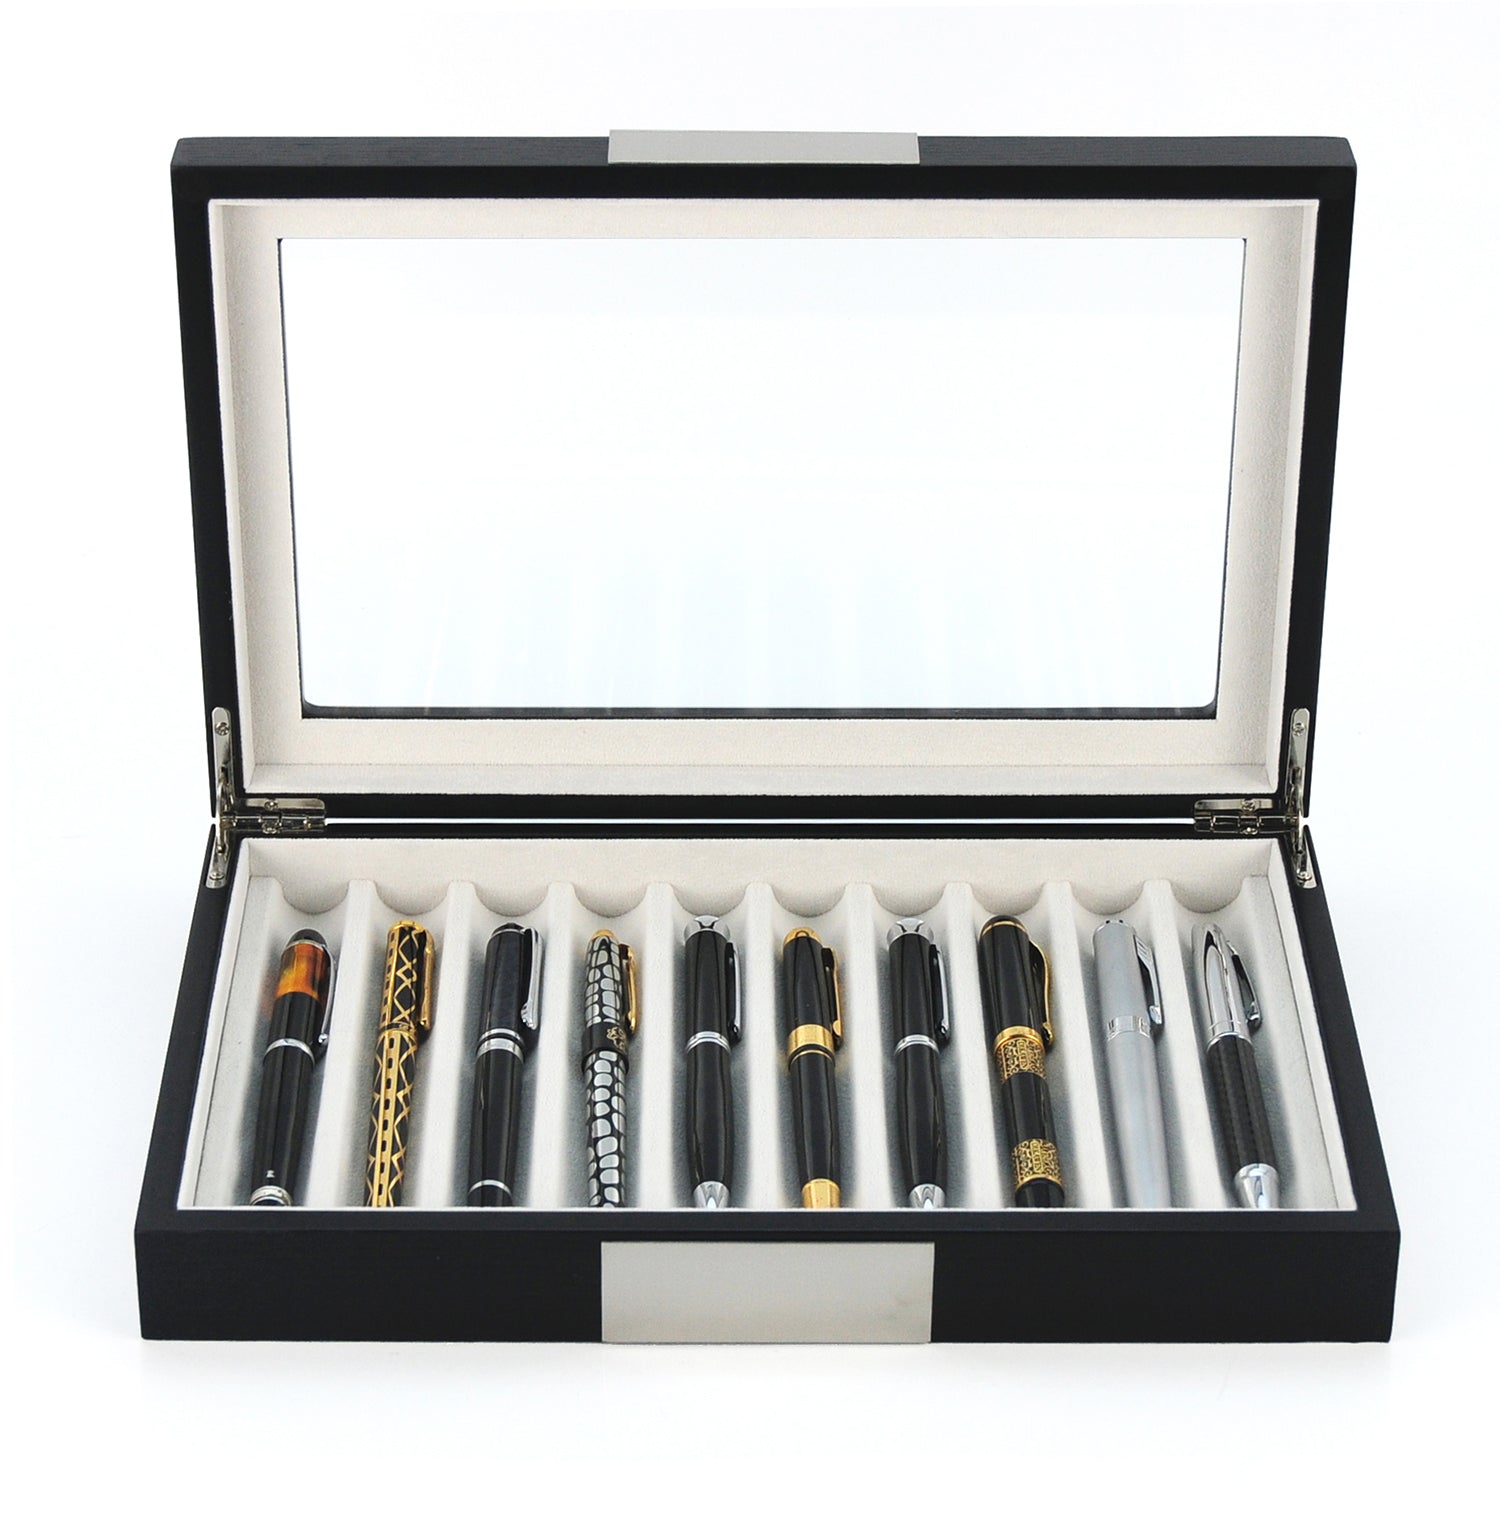 TIMELYBUYS 10 Piece Black Ebony Wood Pen Display Case Storage and Fountain Pen Collector Large Organizer Box with Glass Window Display Case